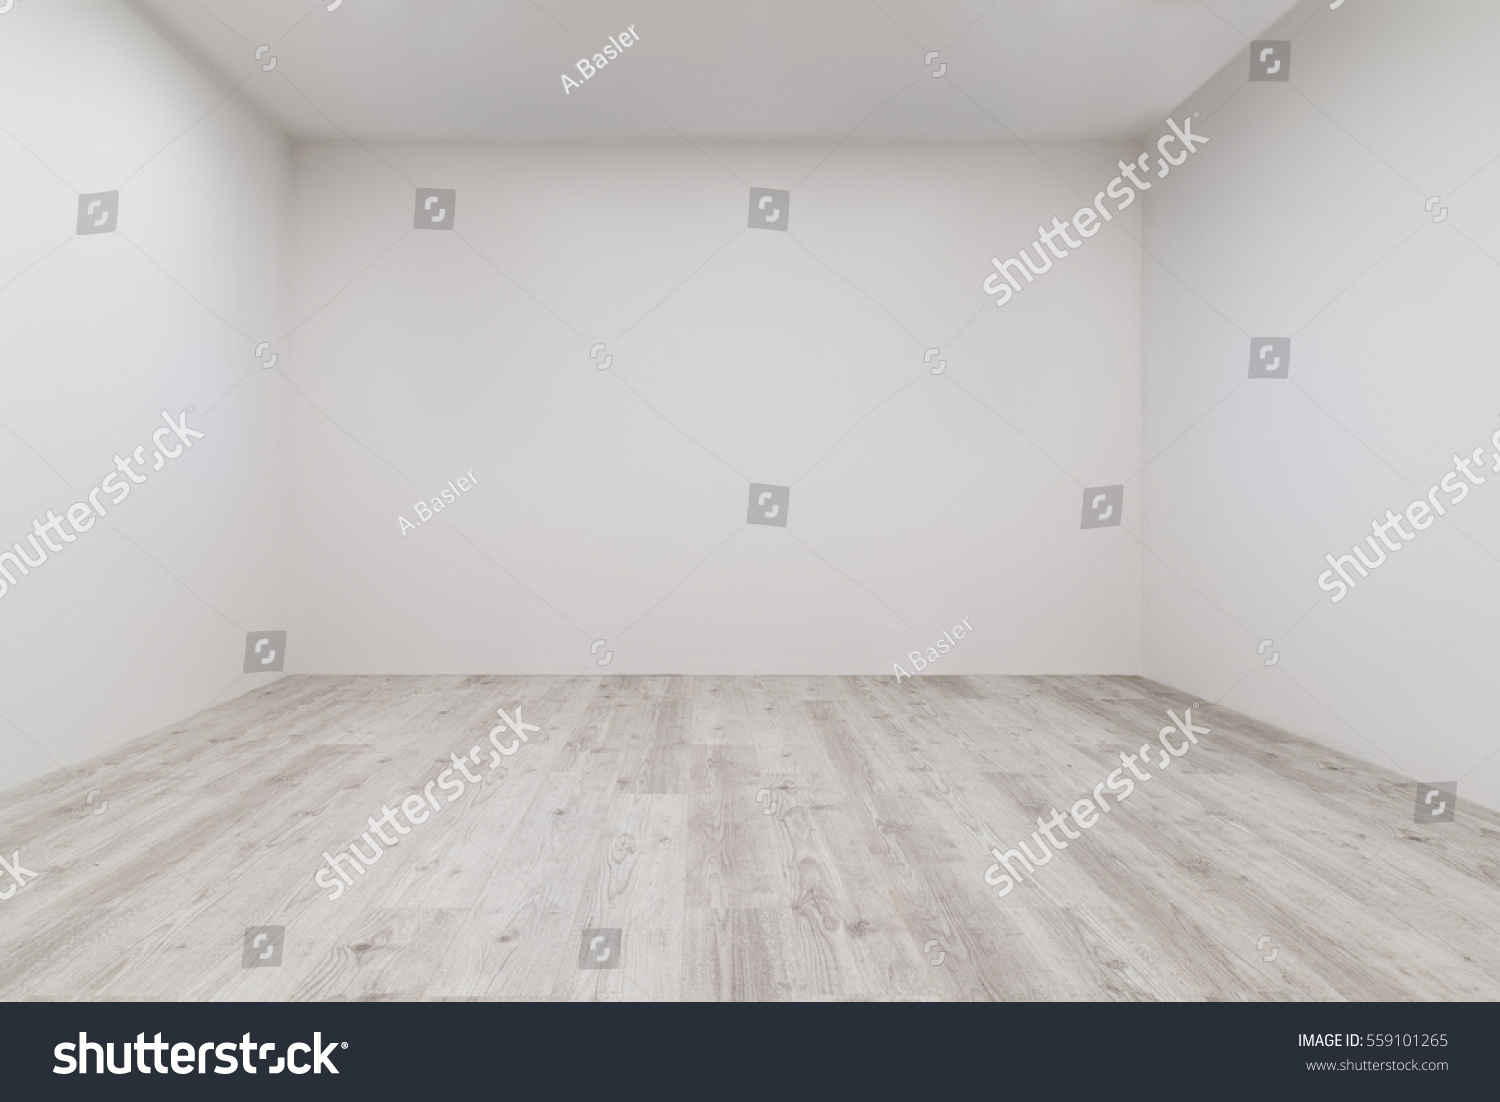 Empty room with whitewashed floating laminate flooring and newly painted white wall in background #559101265